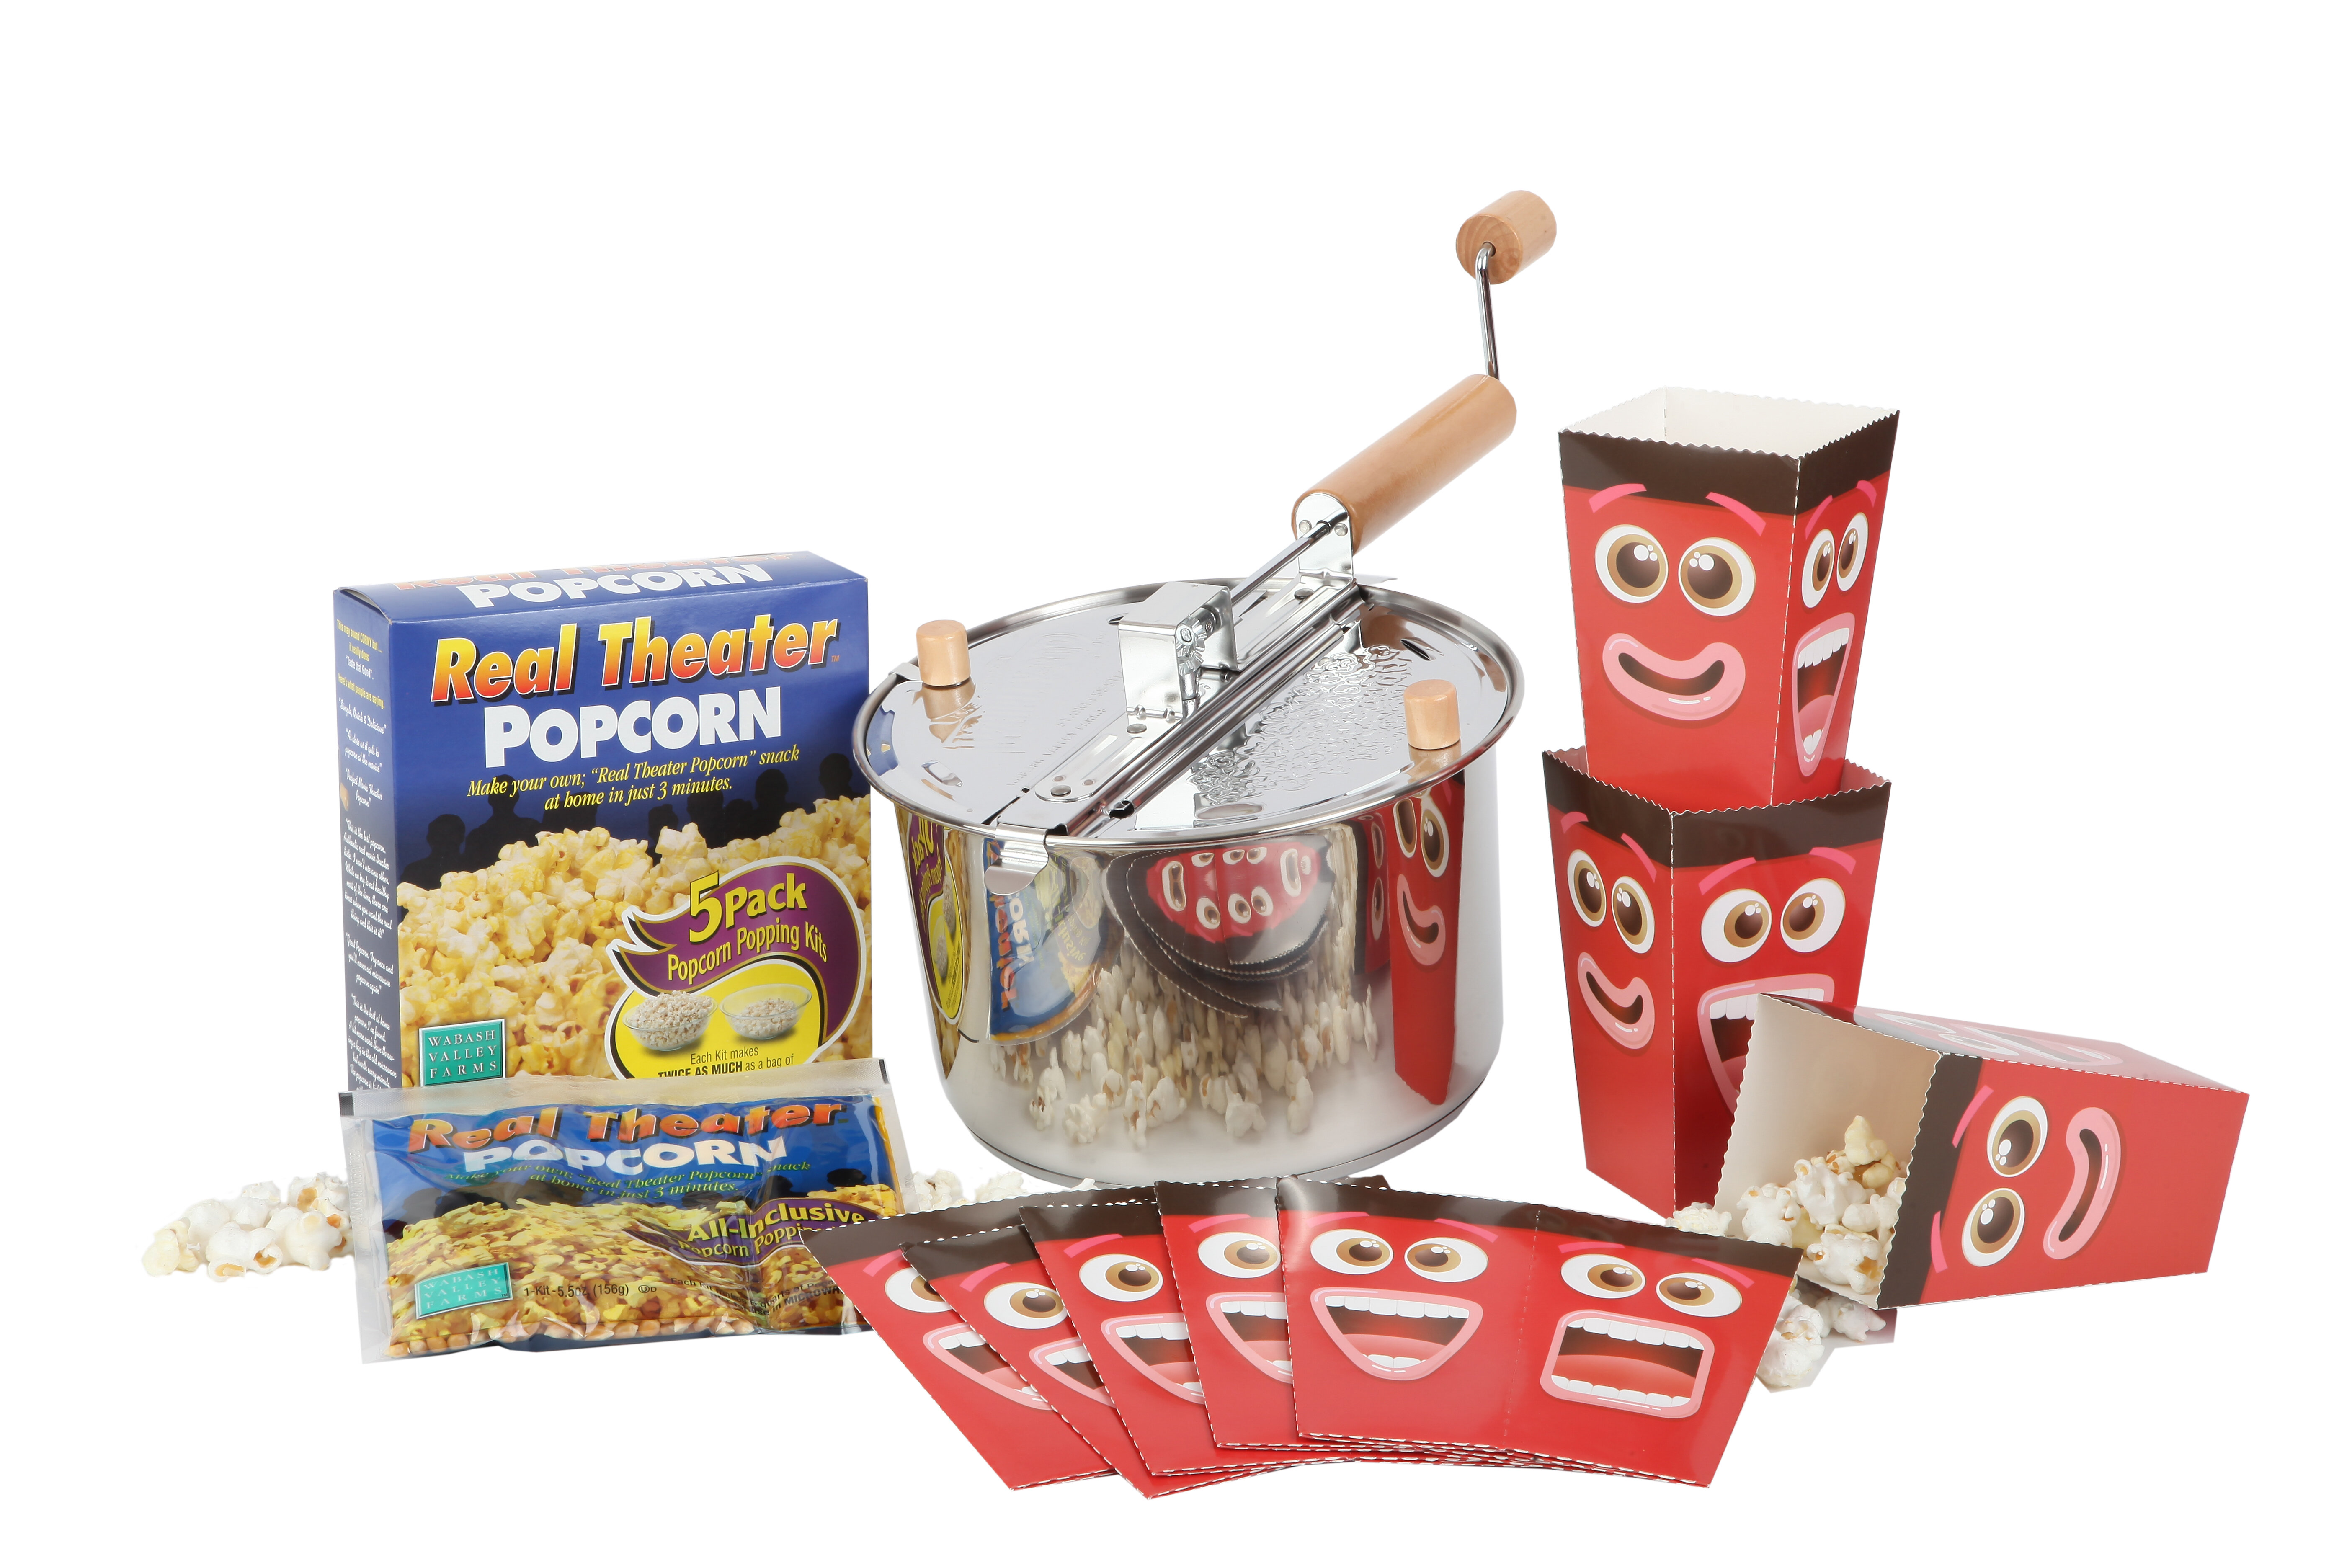 Whirley Stainless-Steel Induction Popcorn Maker